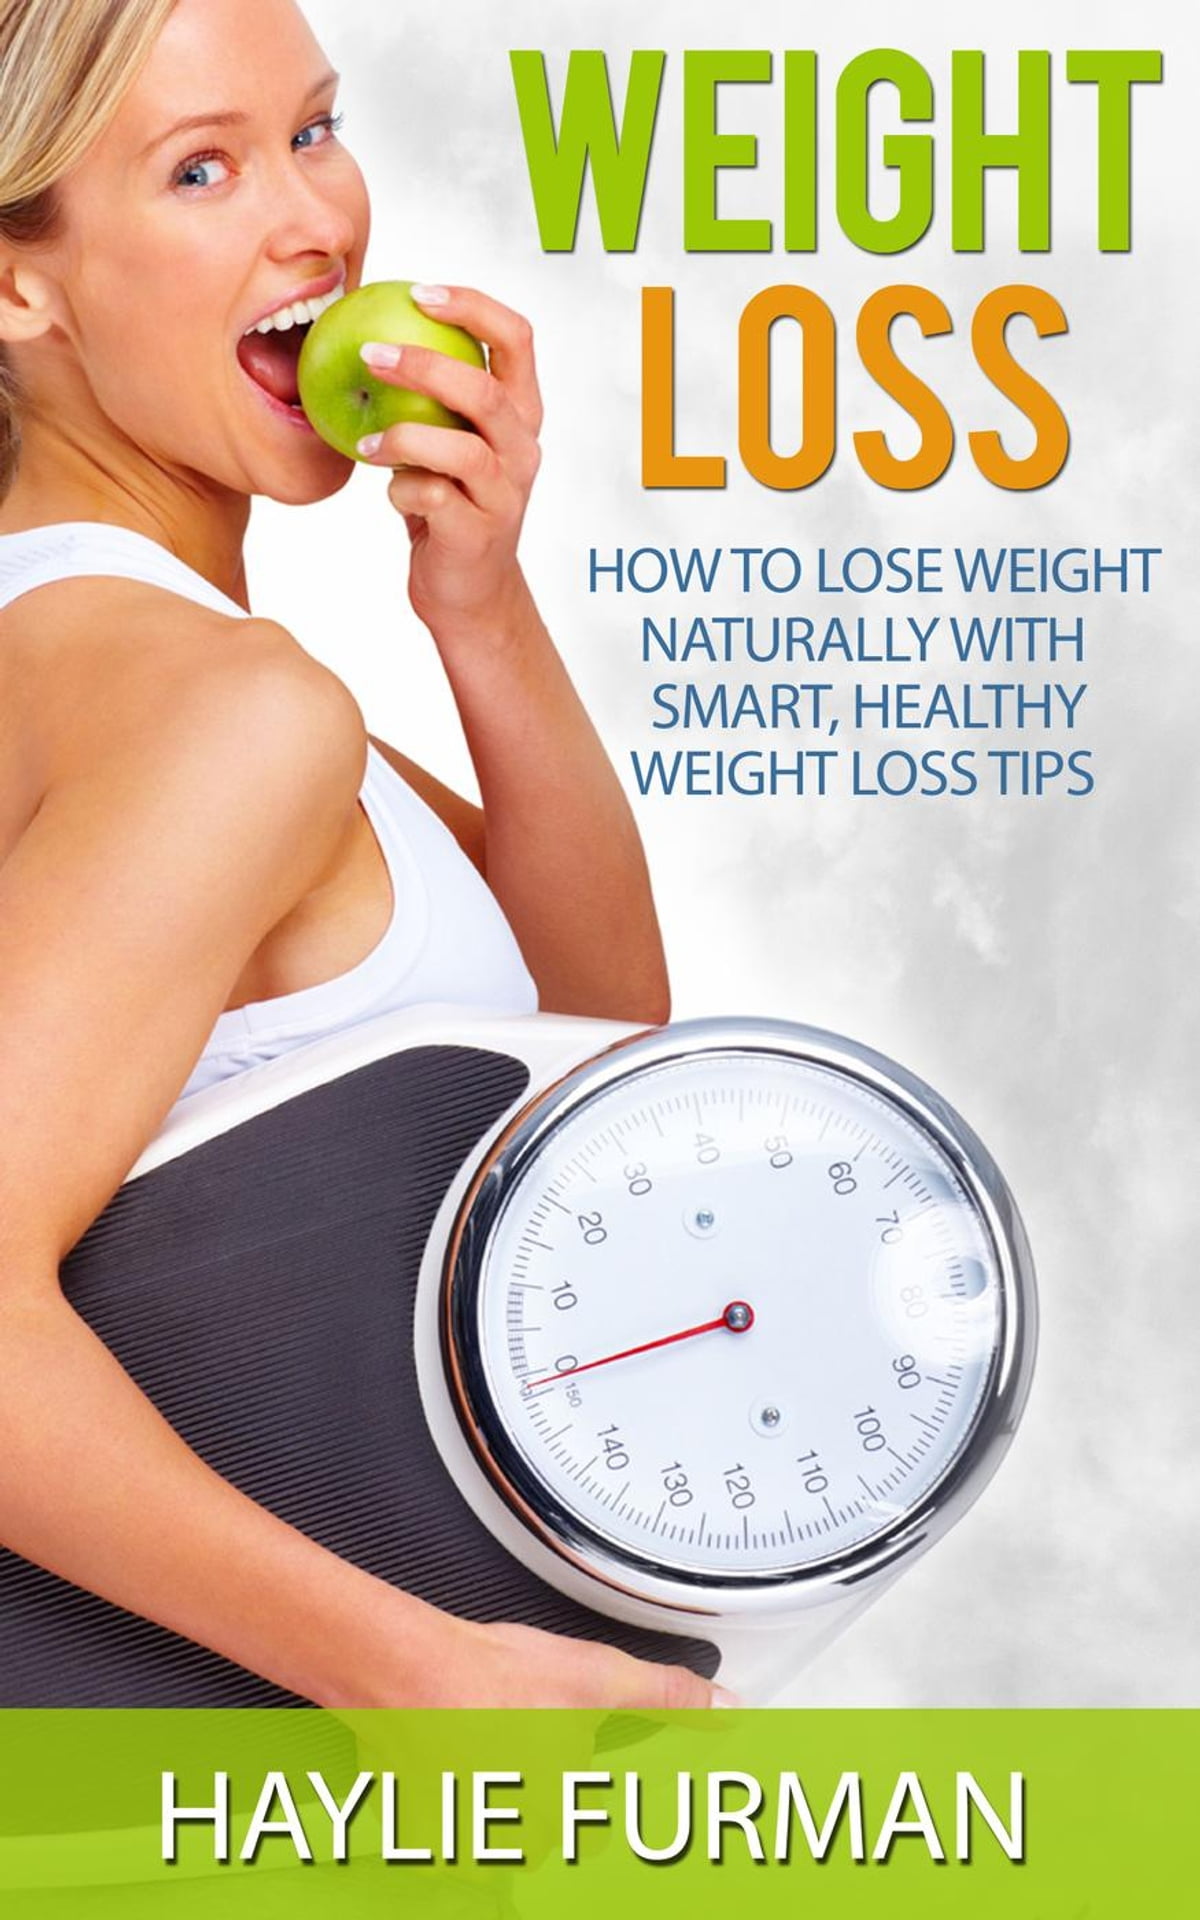 Weight Loss Tips For Women Over 50